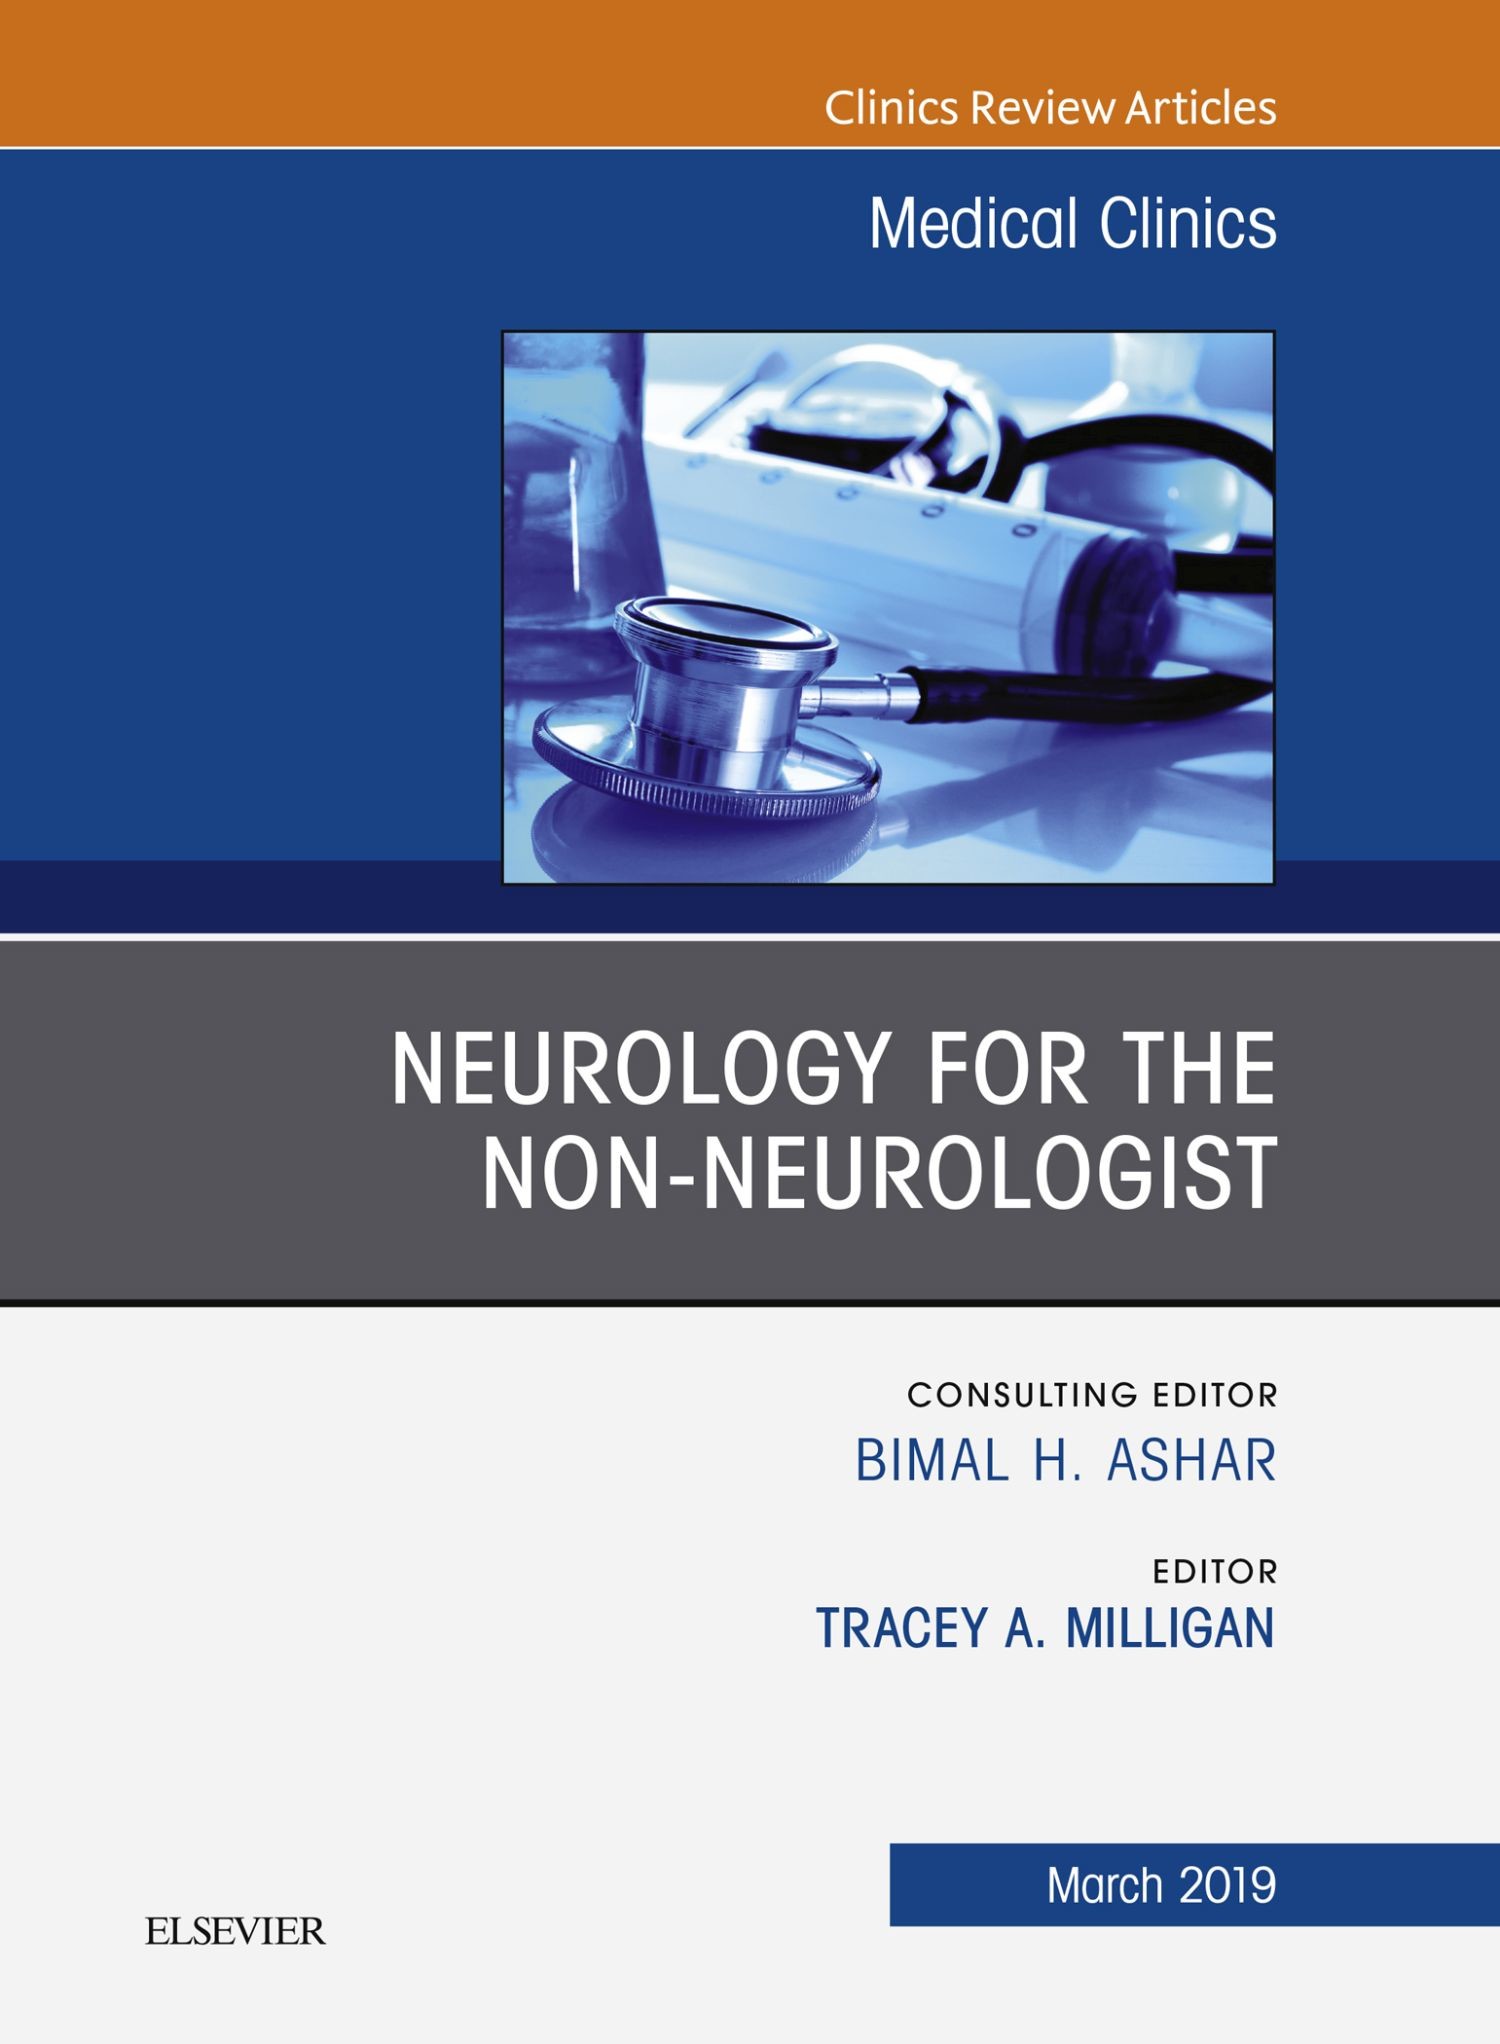 Neurology for the Non-Neurologist, An Issue of Medical Clinics of North America, Ebook